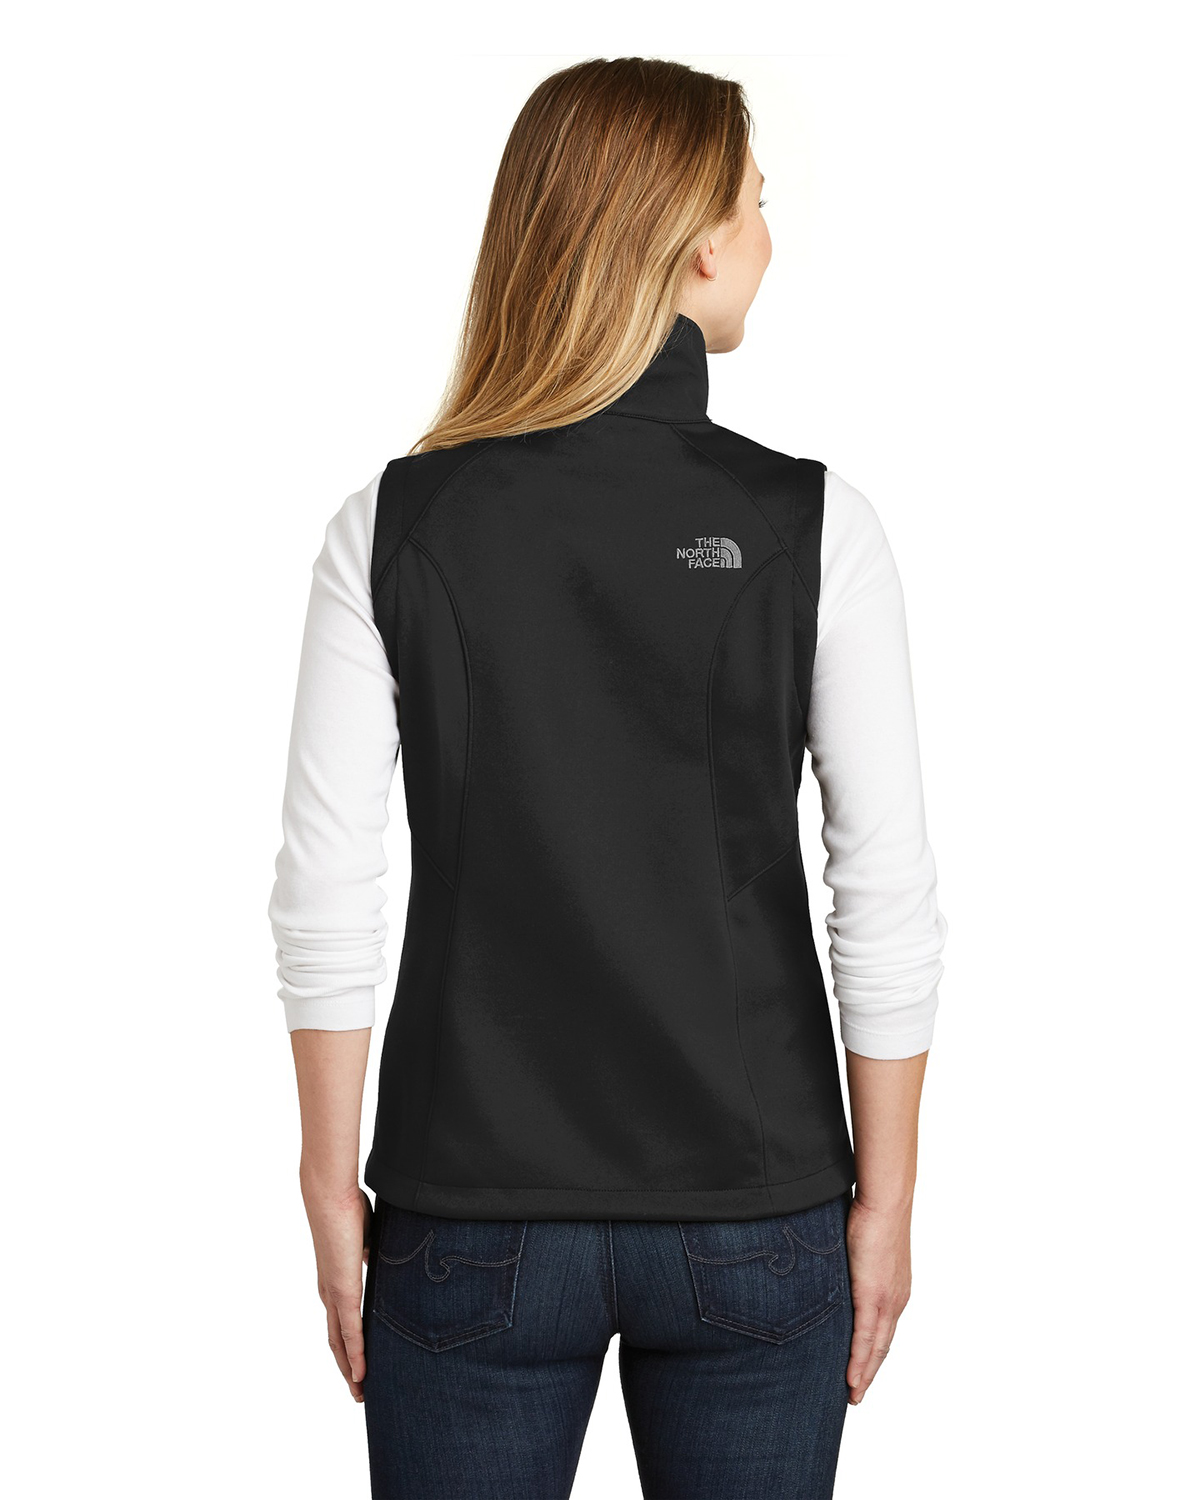 'The North Face NF0A3LH1 Ladies Ridgeline Soft Shell Vest'